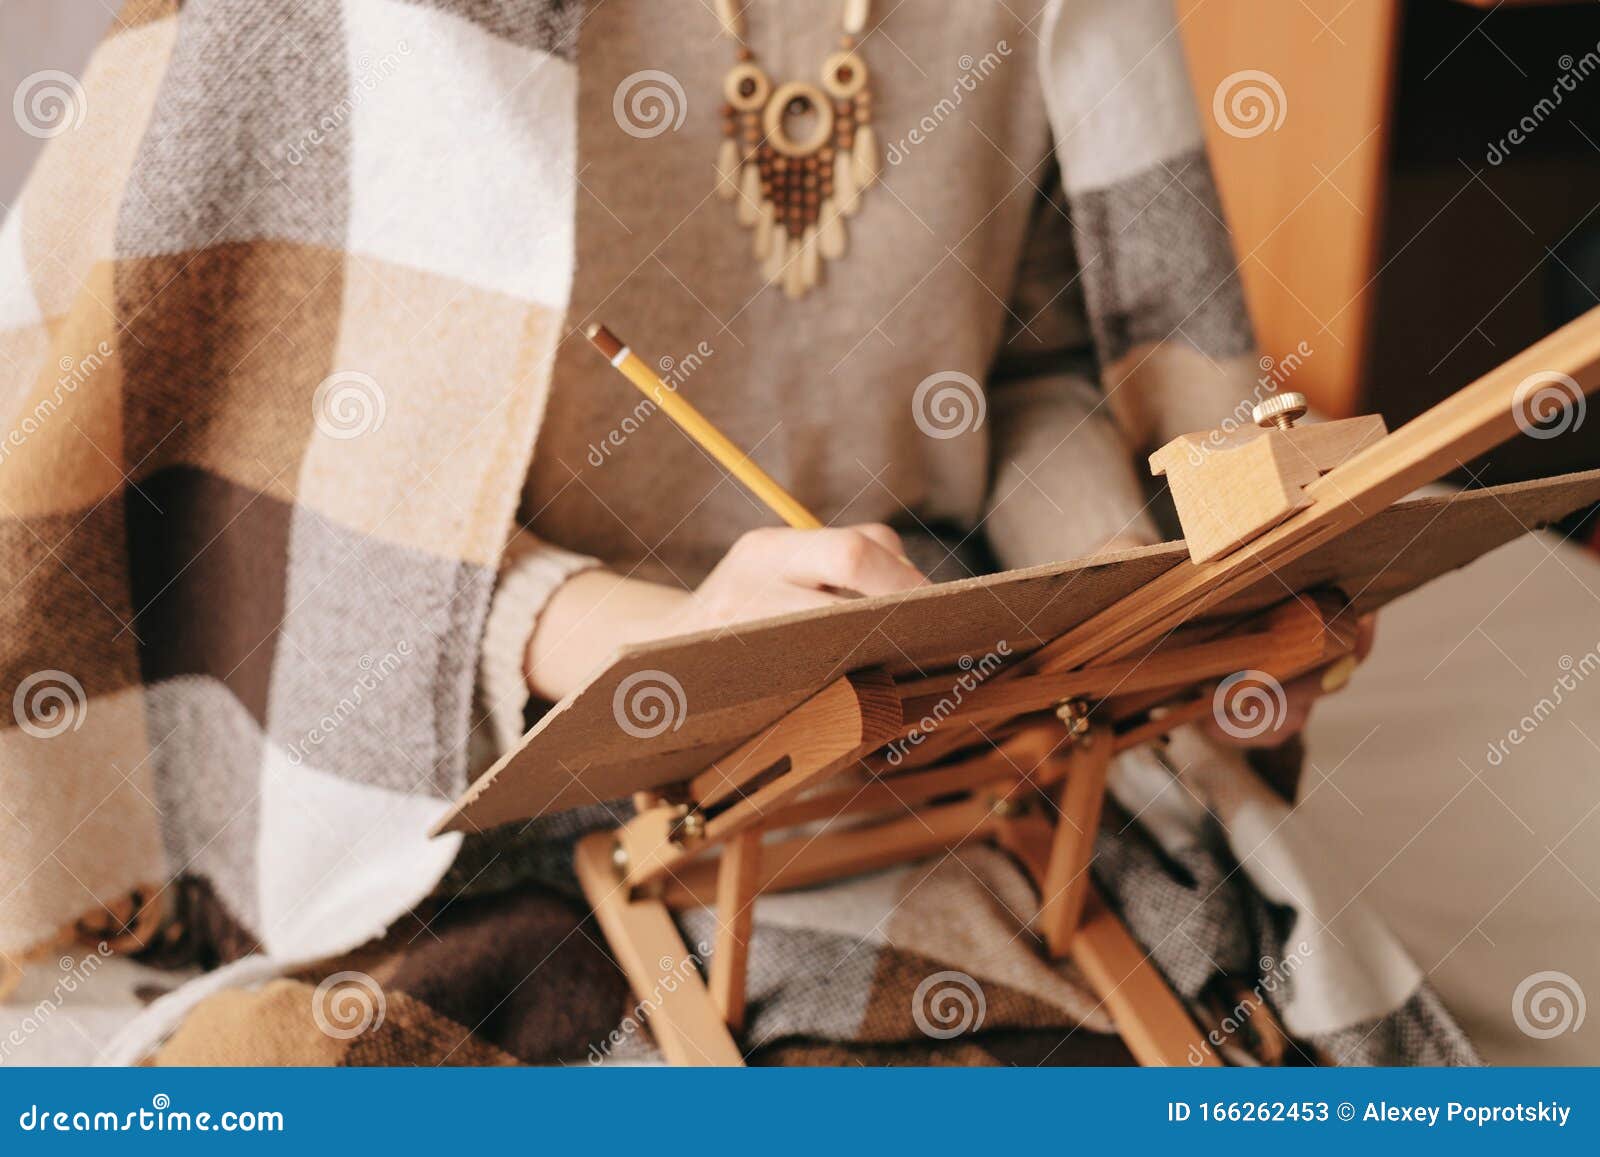 Woman Artist Drawing on Paper Easel with Pencil. Stock Image - Image of ...